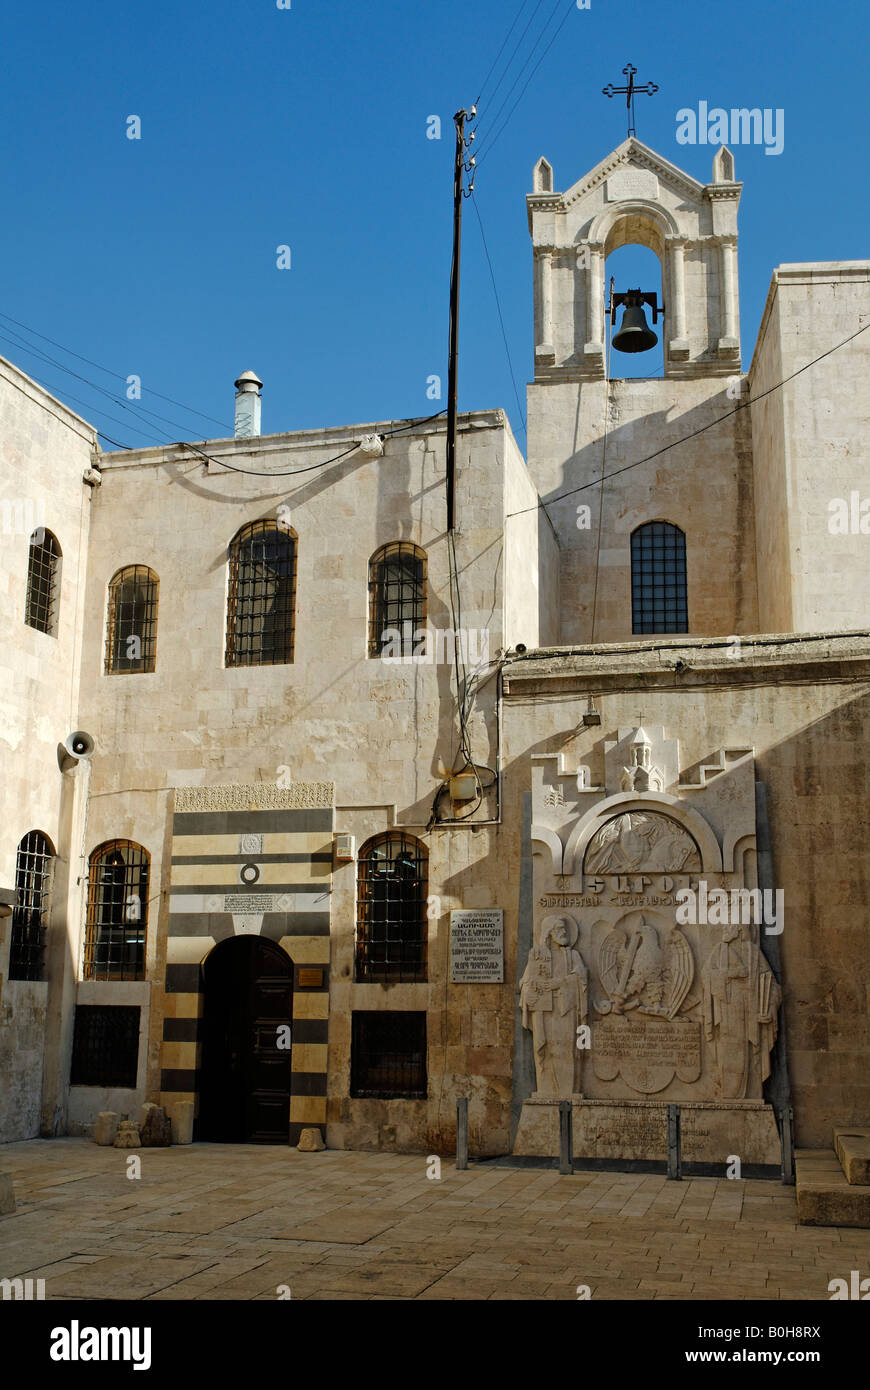 Historic Armenian church in Aleppo, Unesco World Heritage Site, Syria, Middle East Stock Photo